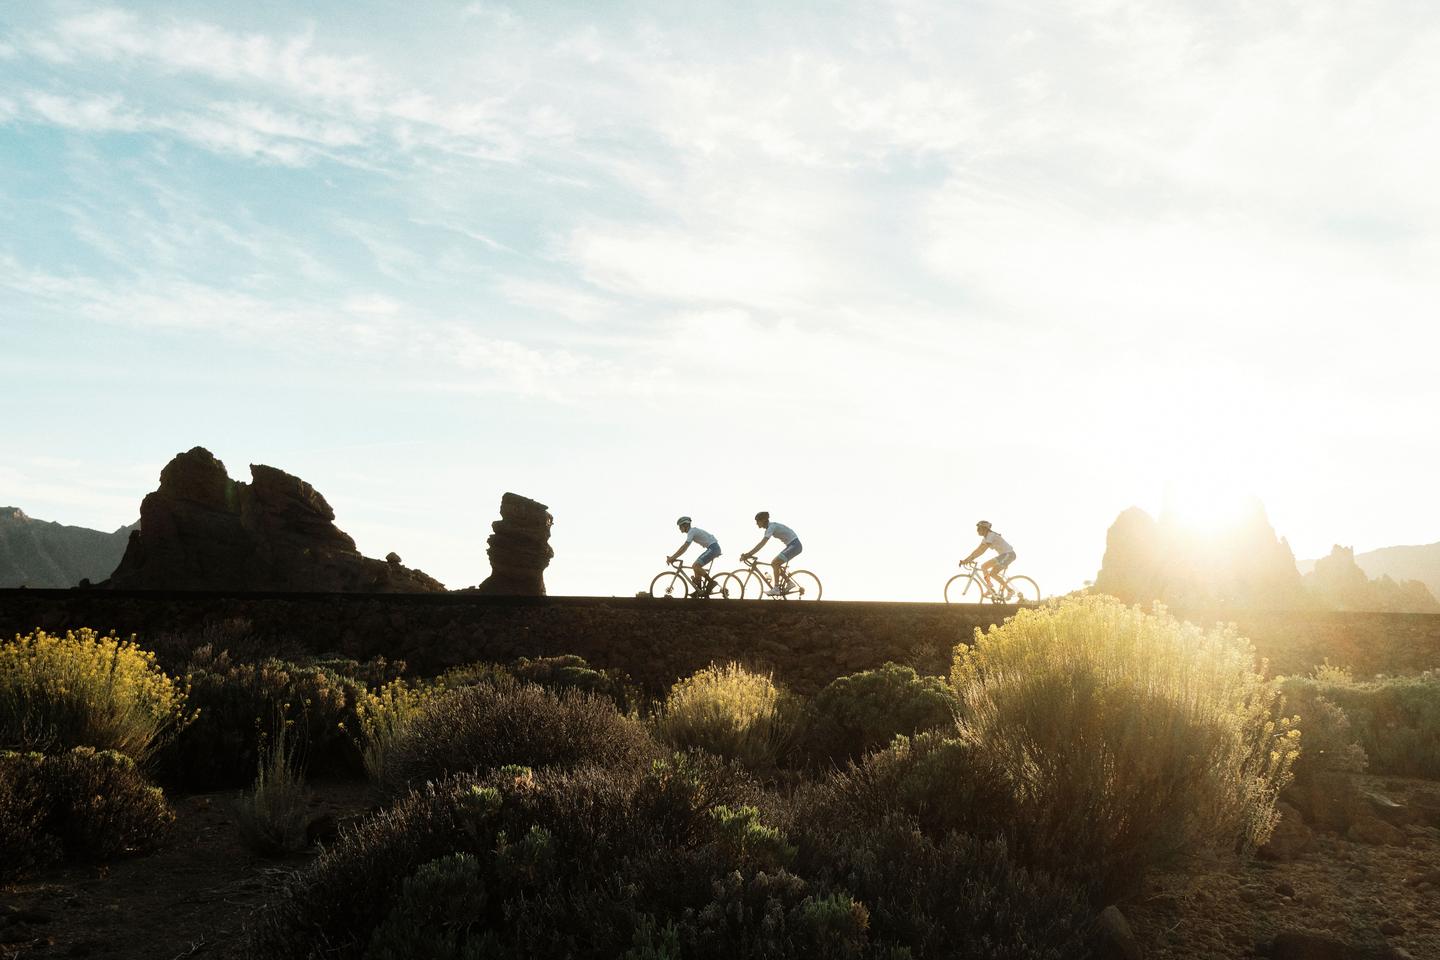 Three cyclists riding at sunrise with rock formations in the background and lush vegetation in the foreground.